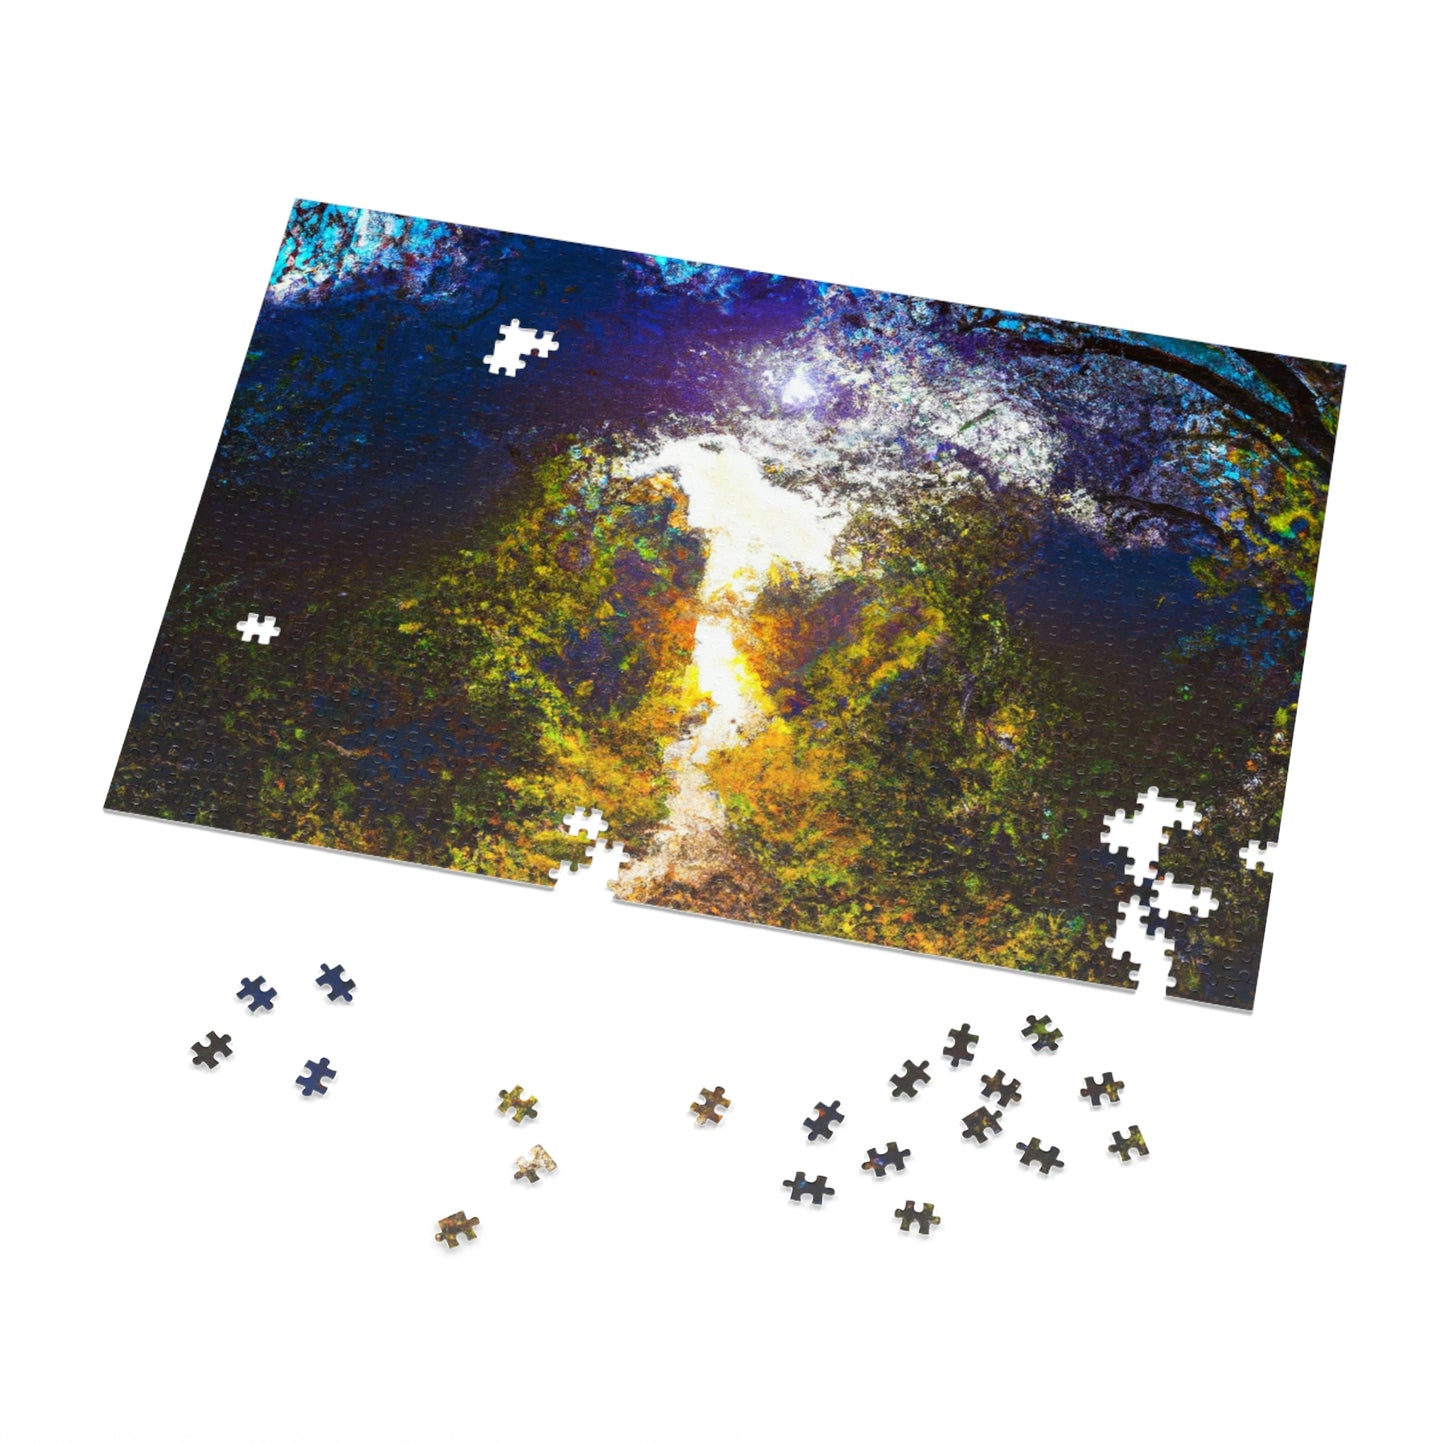 "A Beam of Light on a Forgotten Path" - The Alien Jigsaw Puzzle